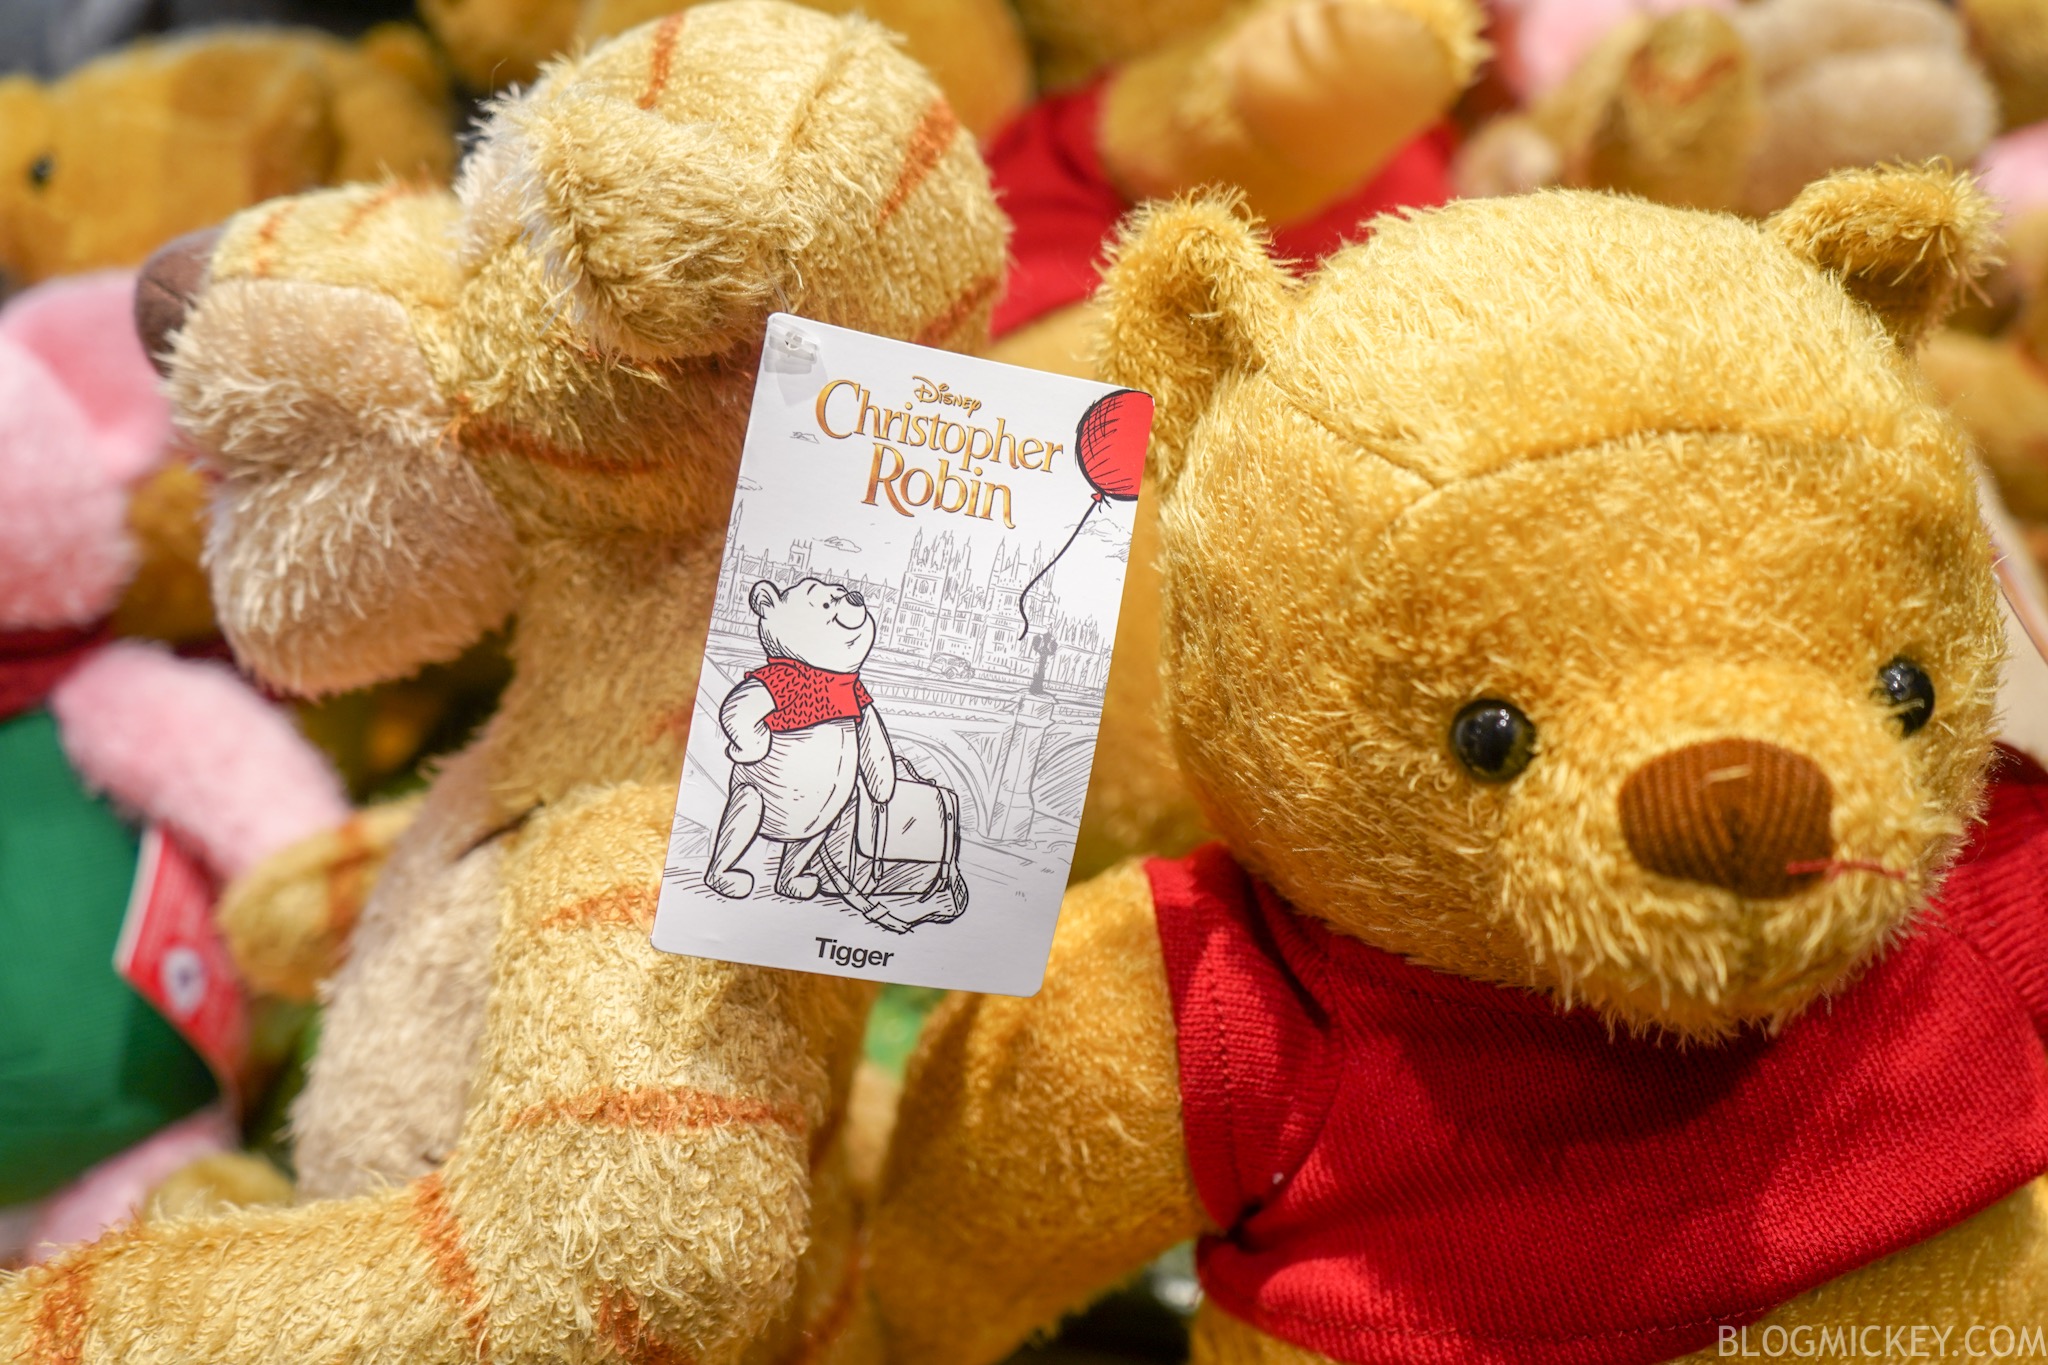 pooh stuffed animal from christopher robin